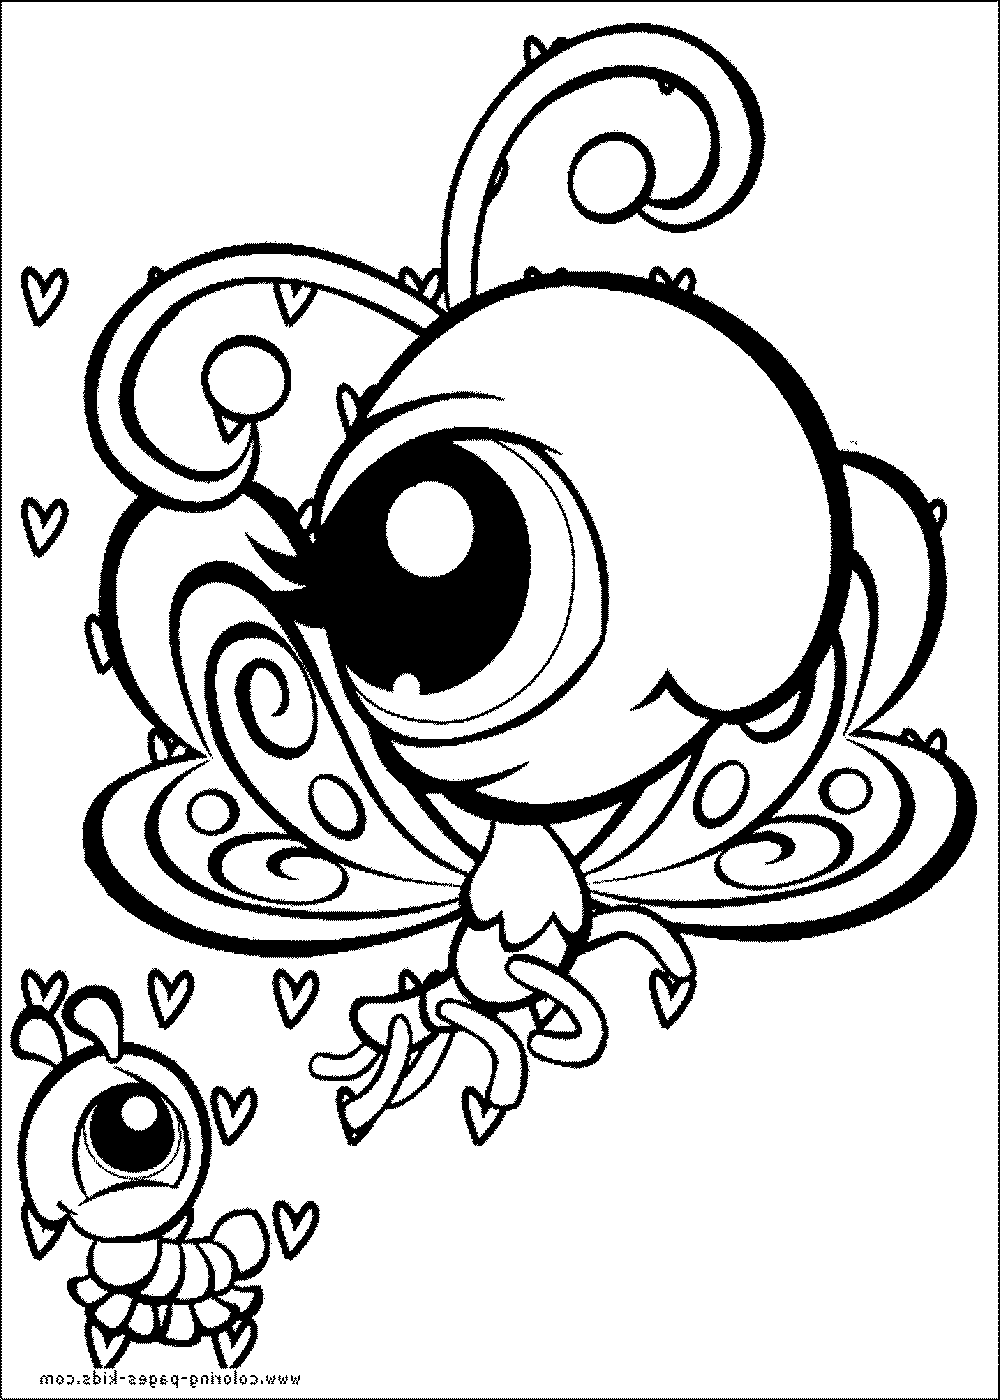 Littlest Pet Shops Coloring Page for My Kids